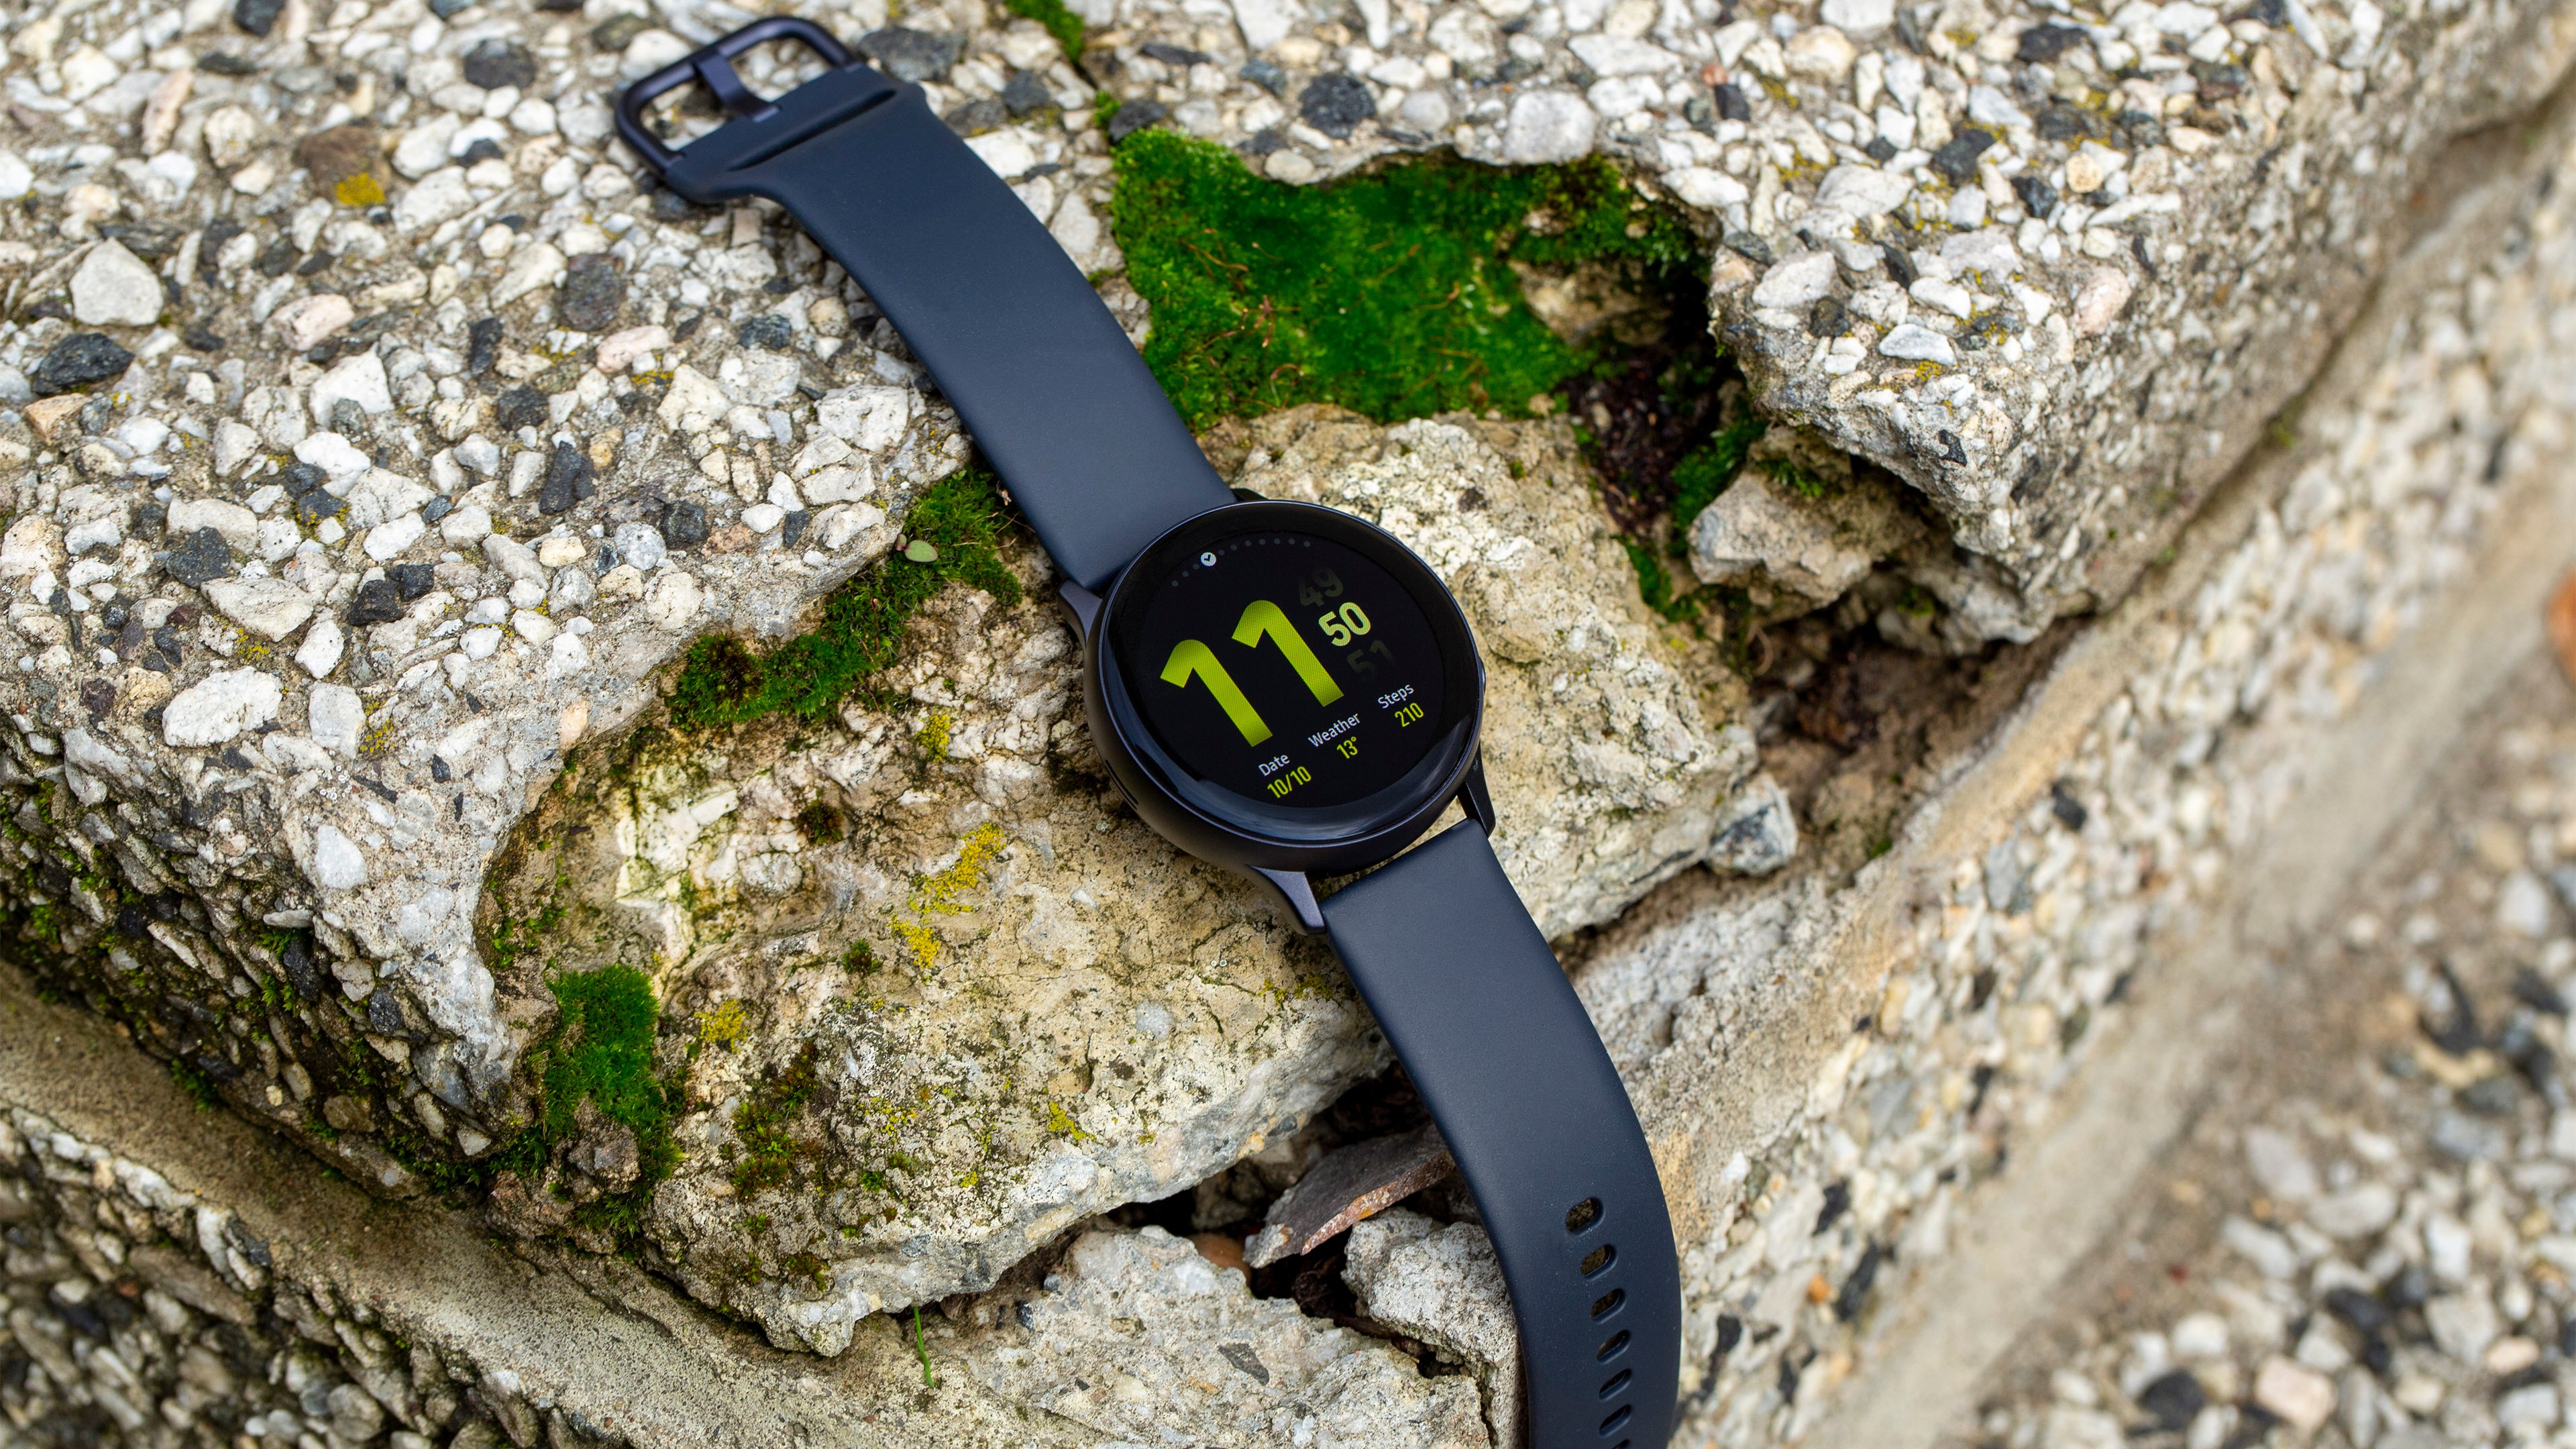 Samsung Galaxy Watch Active 2 review: the best Android